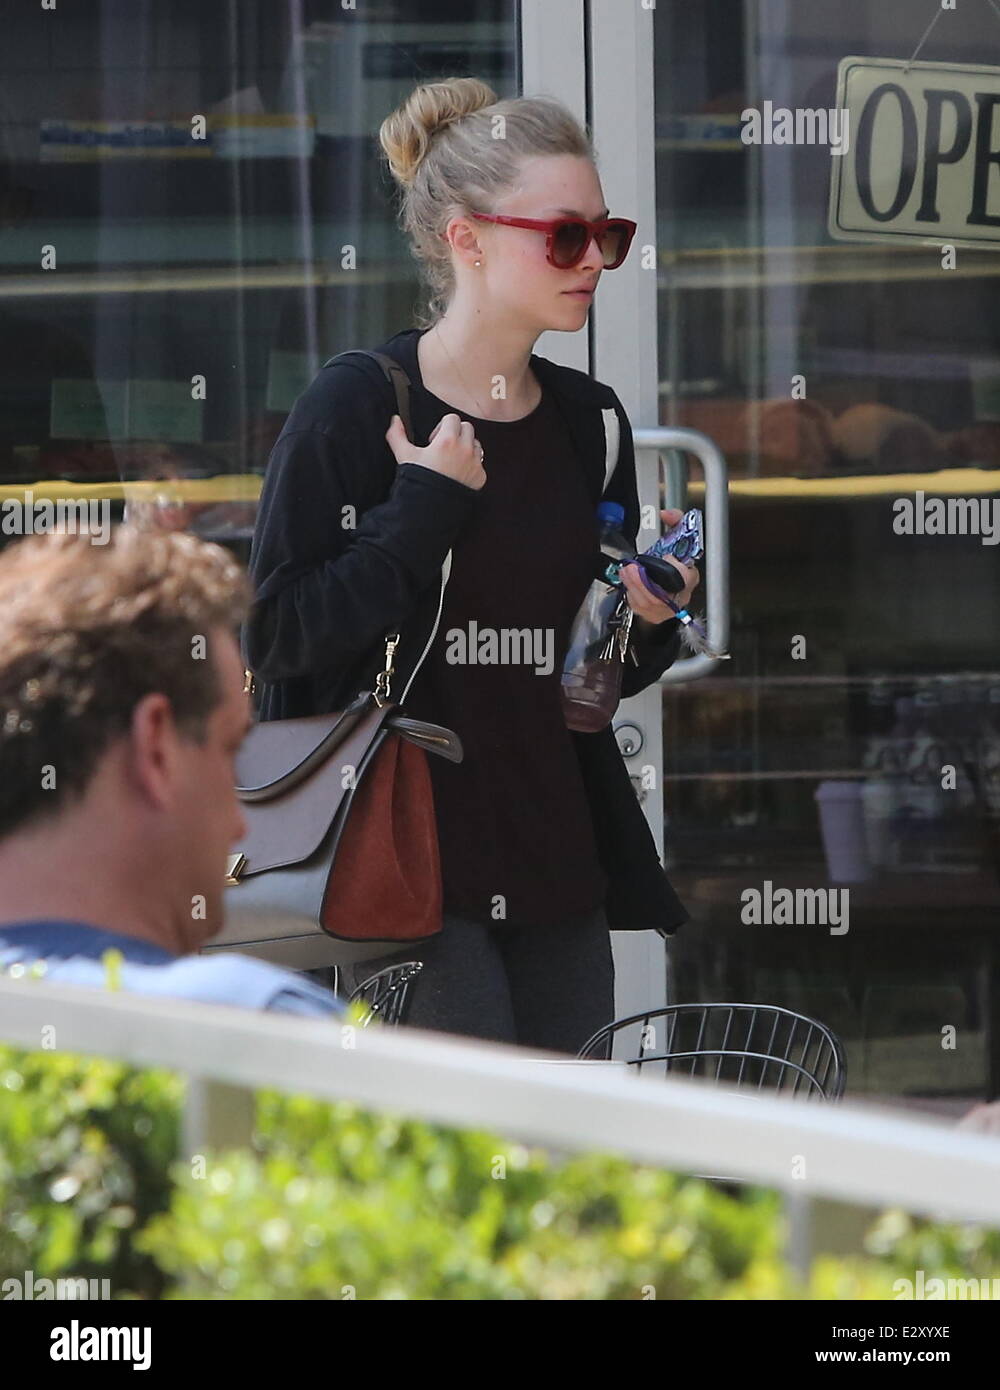 Amanda Seyfried has lunch with a friend at the Commissary Coffee Shop  Featuring: Amanda Seyfried Where: Los Angeles, California, United States When: 02 Apr 2013 Stock Photo